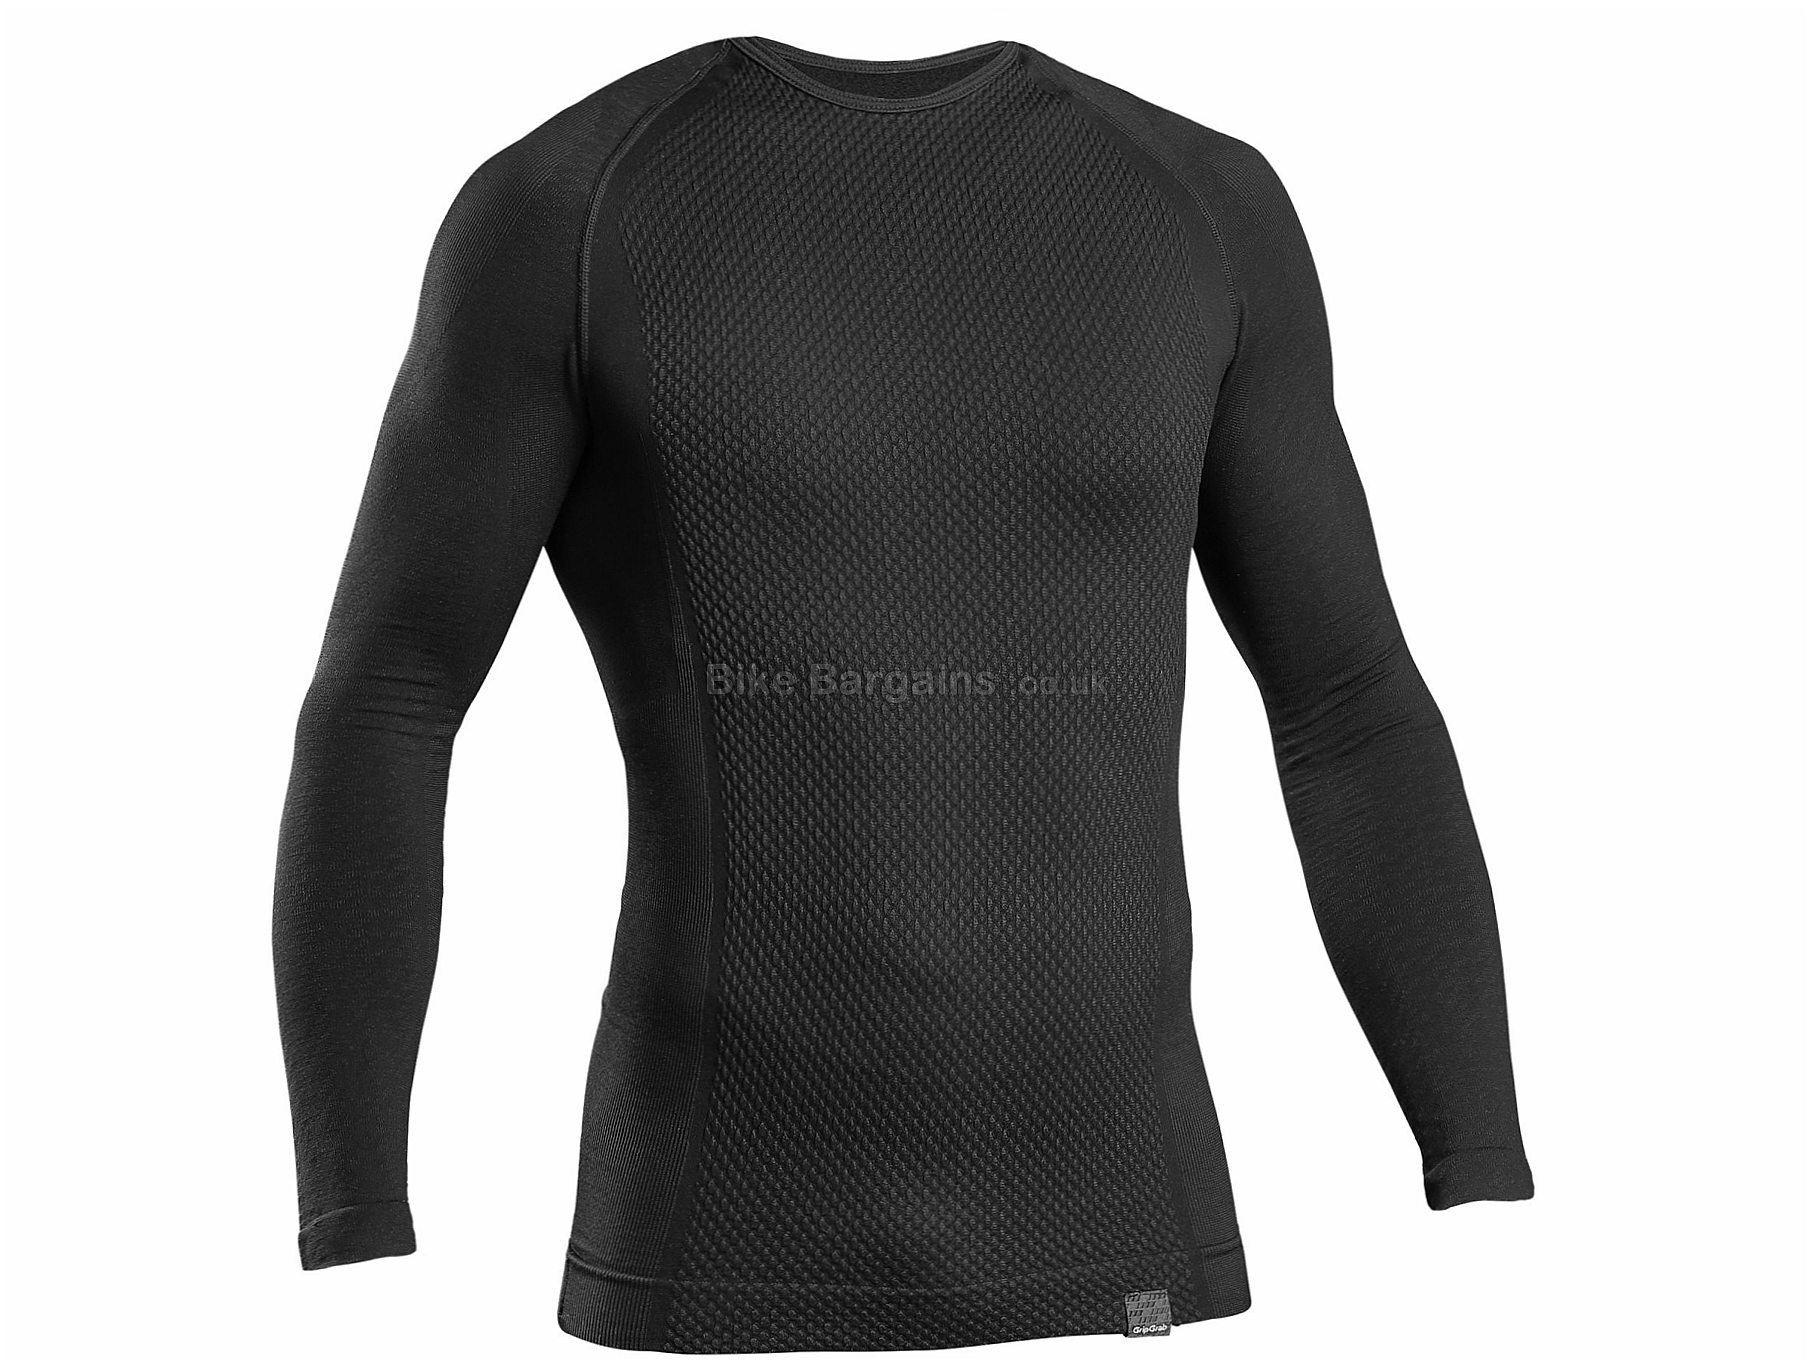 GripGrab Expert Seamless Thermal Long Sleeve Base Layer (Expired) was £22